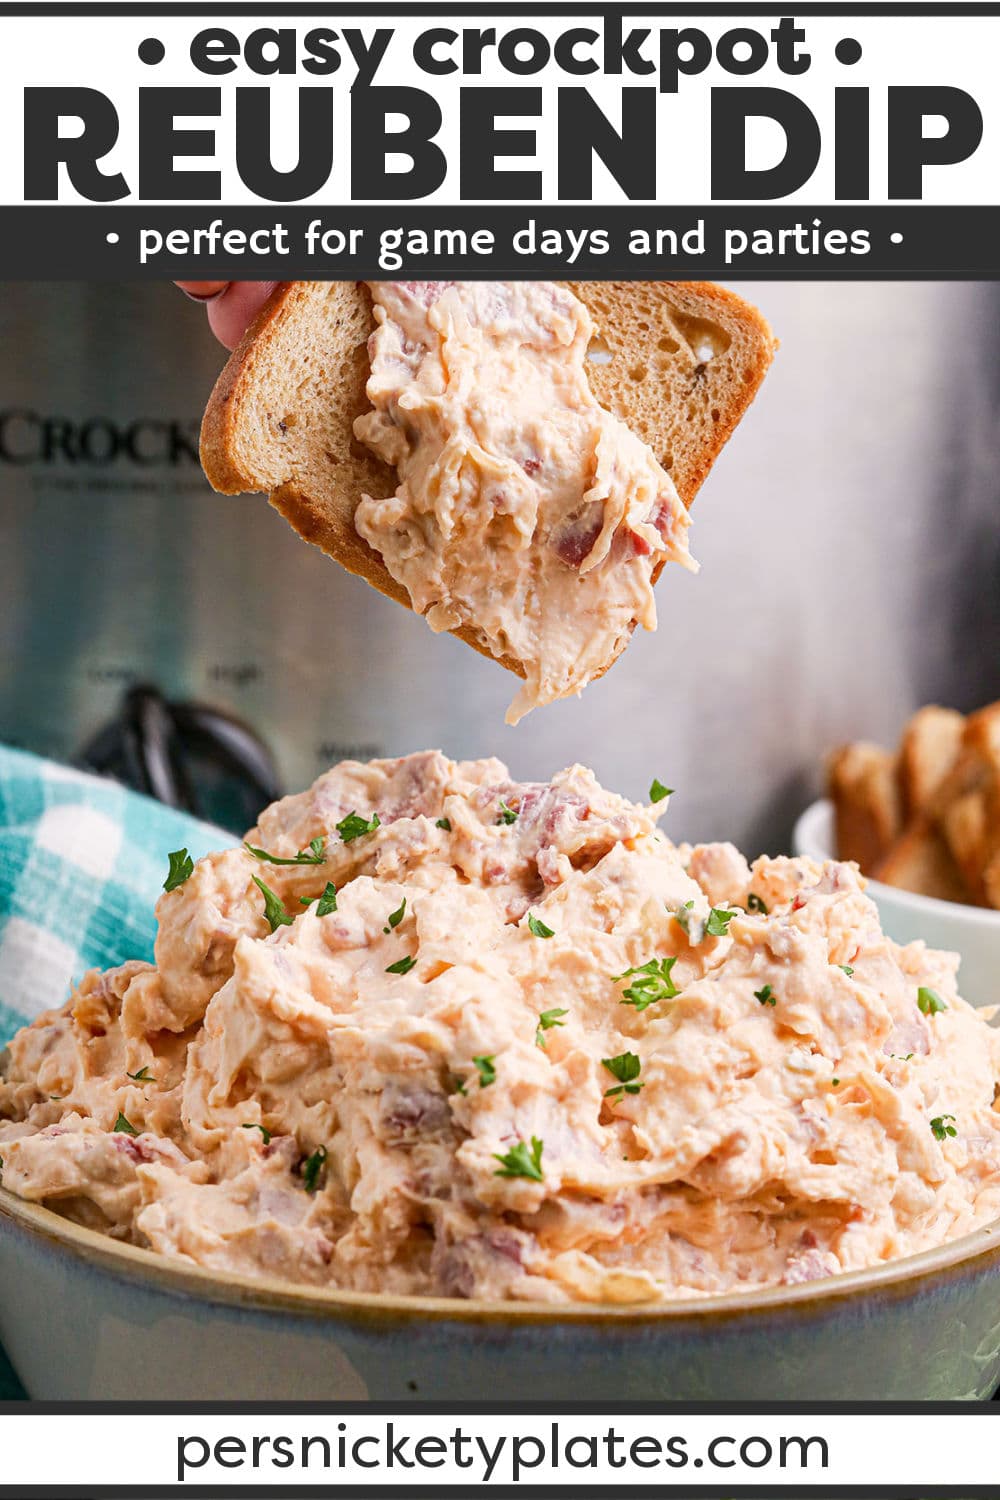 This slow cooker Reuben dip has all the best qualities and flavors of the classic Reuben sandwich in the form of a dip made with salty corned beef, cream cheese, Swiss cheese, tangy sauerkraut, and thousand island dressing. There's nothing more comforting than a warm creamy dip and it's even better when it's a true dump-and-set recipe like this one! | www.persnicketyplates.com